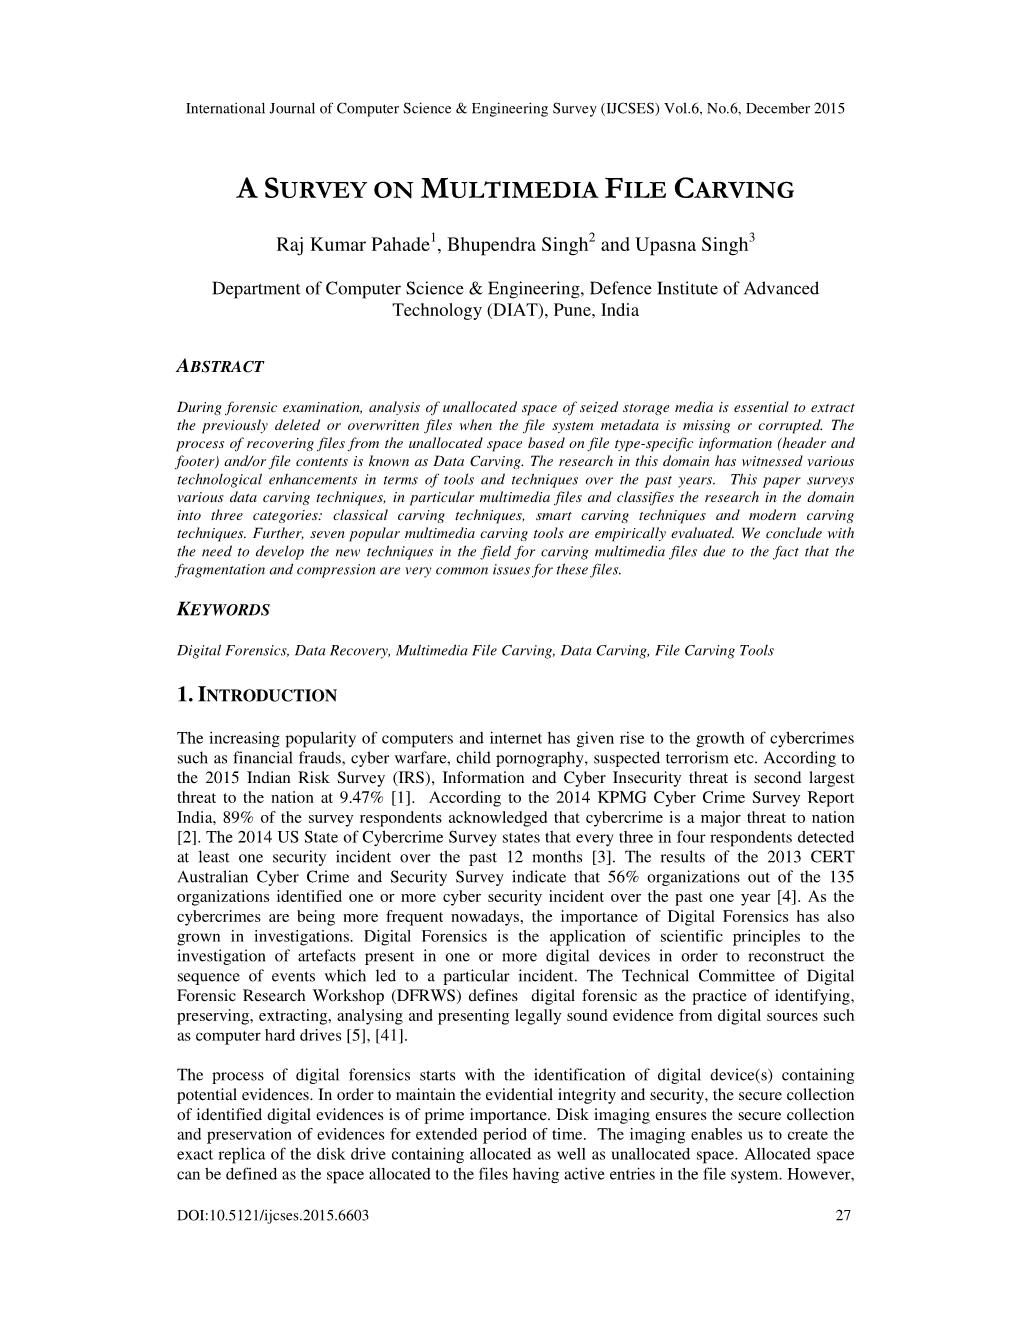 A Survey on Multimedia File Carving